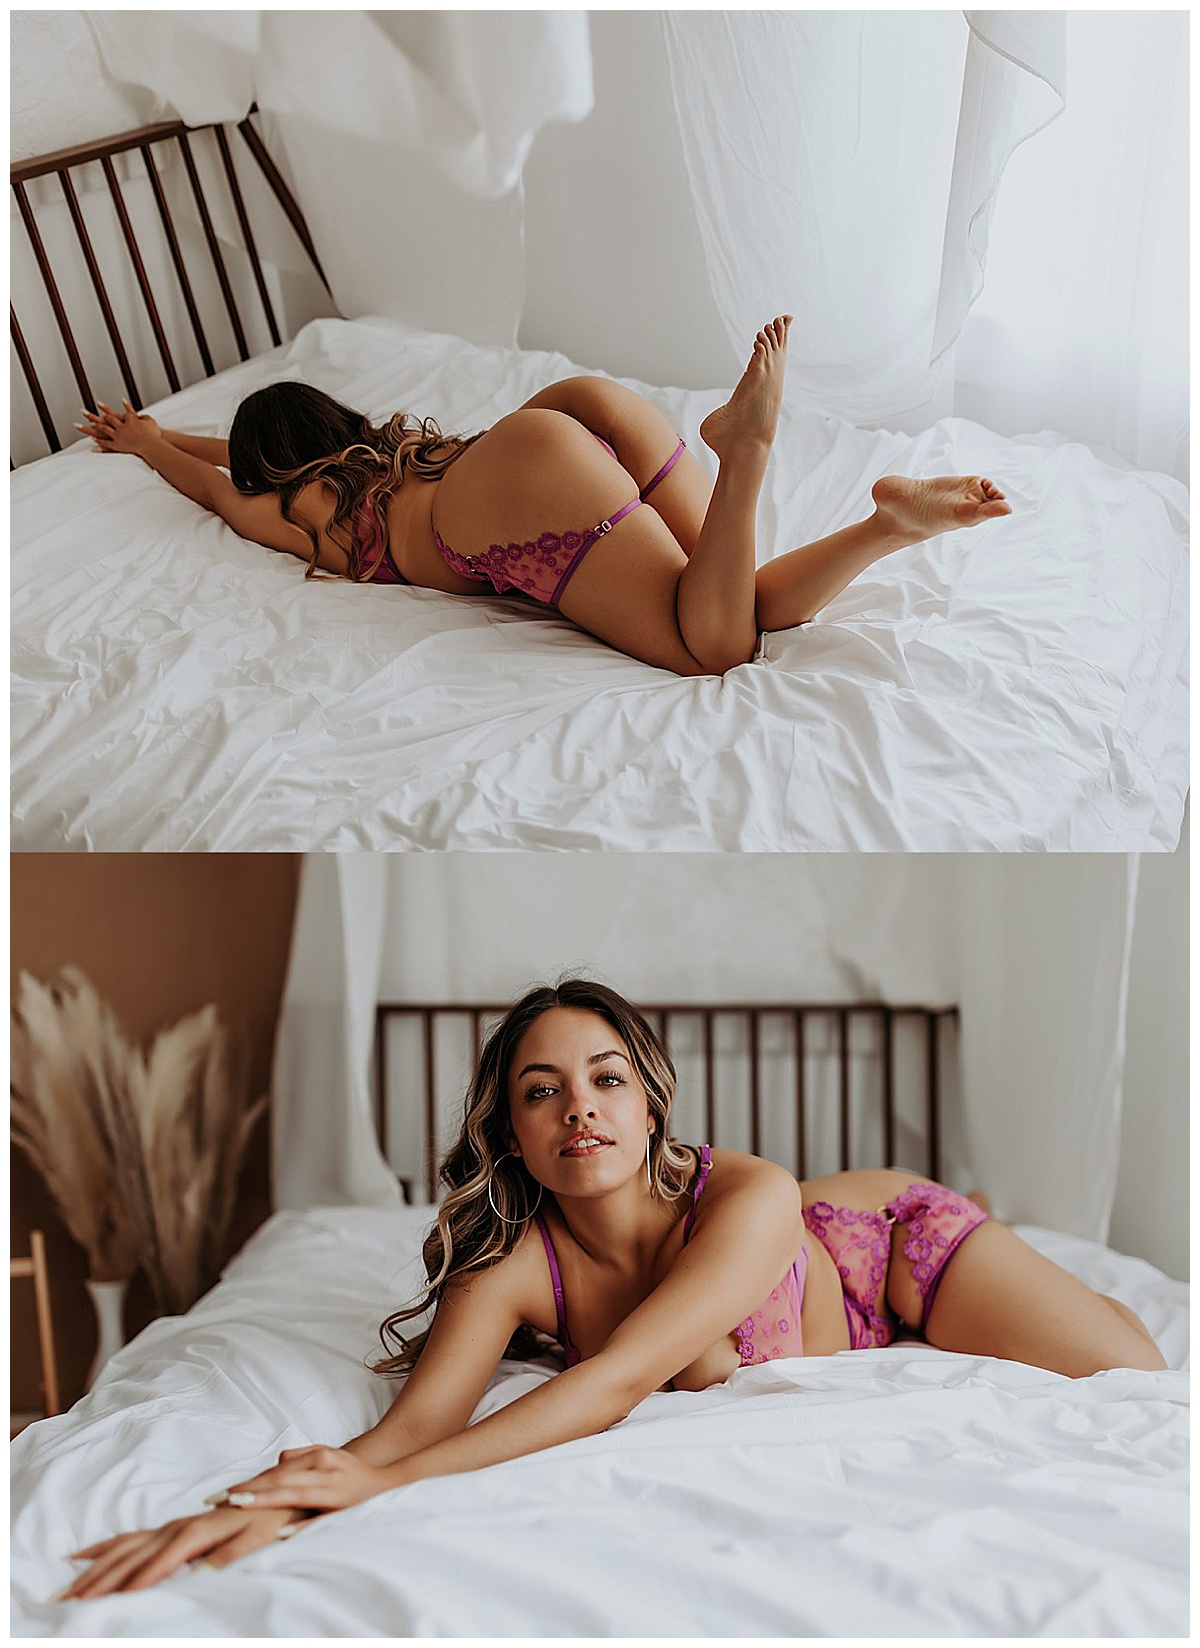 Lady lays on bed in purple lingerie for Valentine’s Day Gift